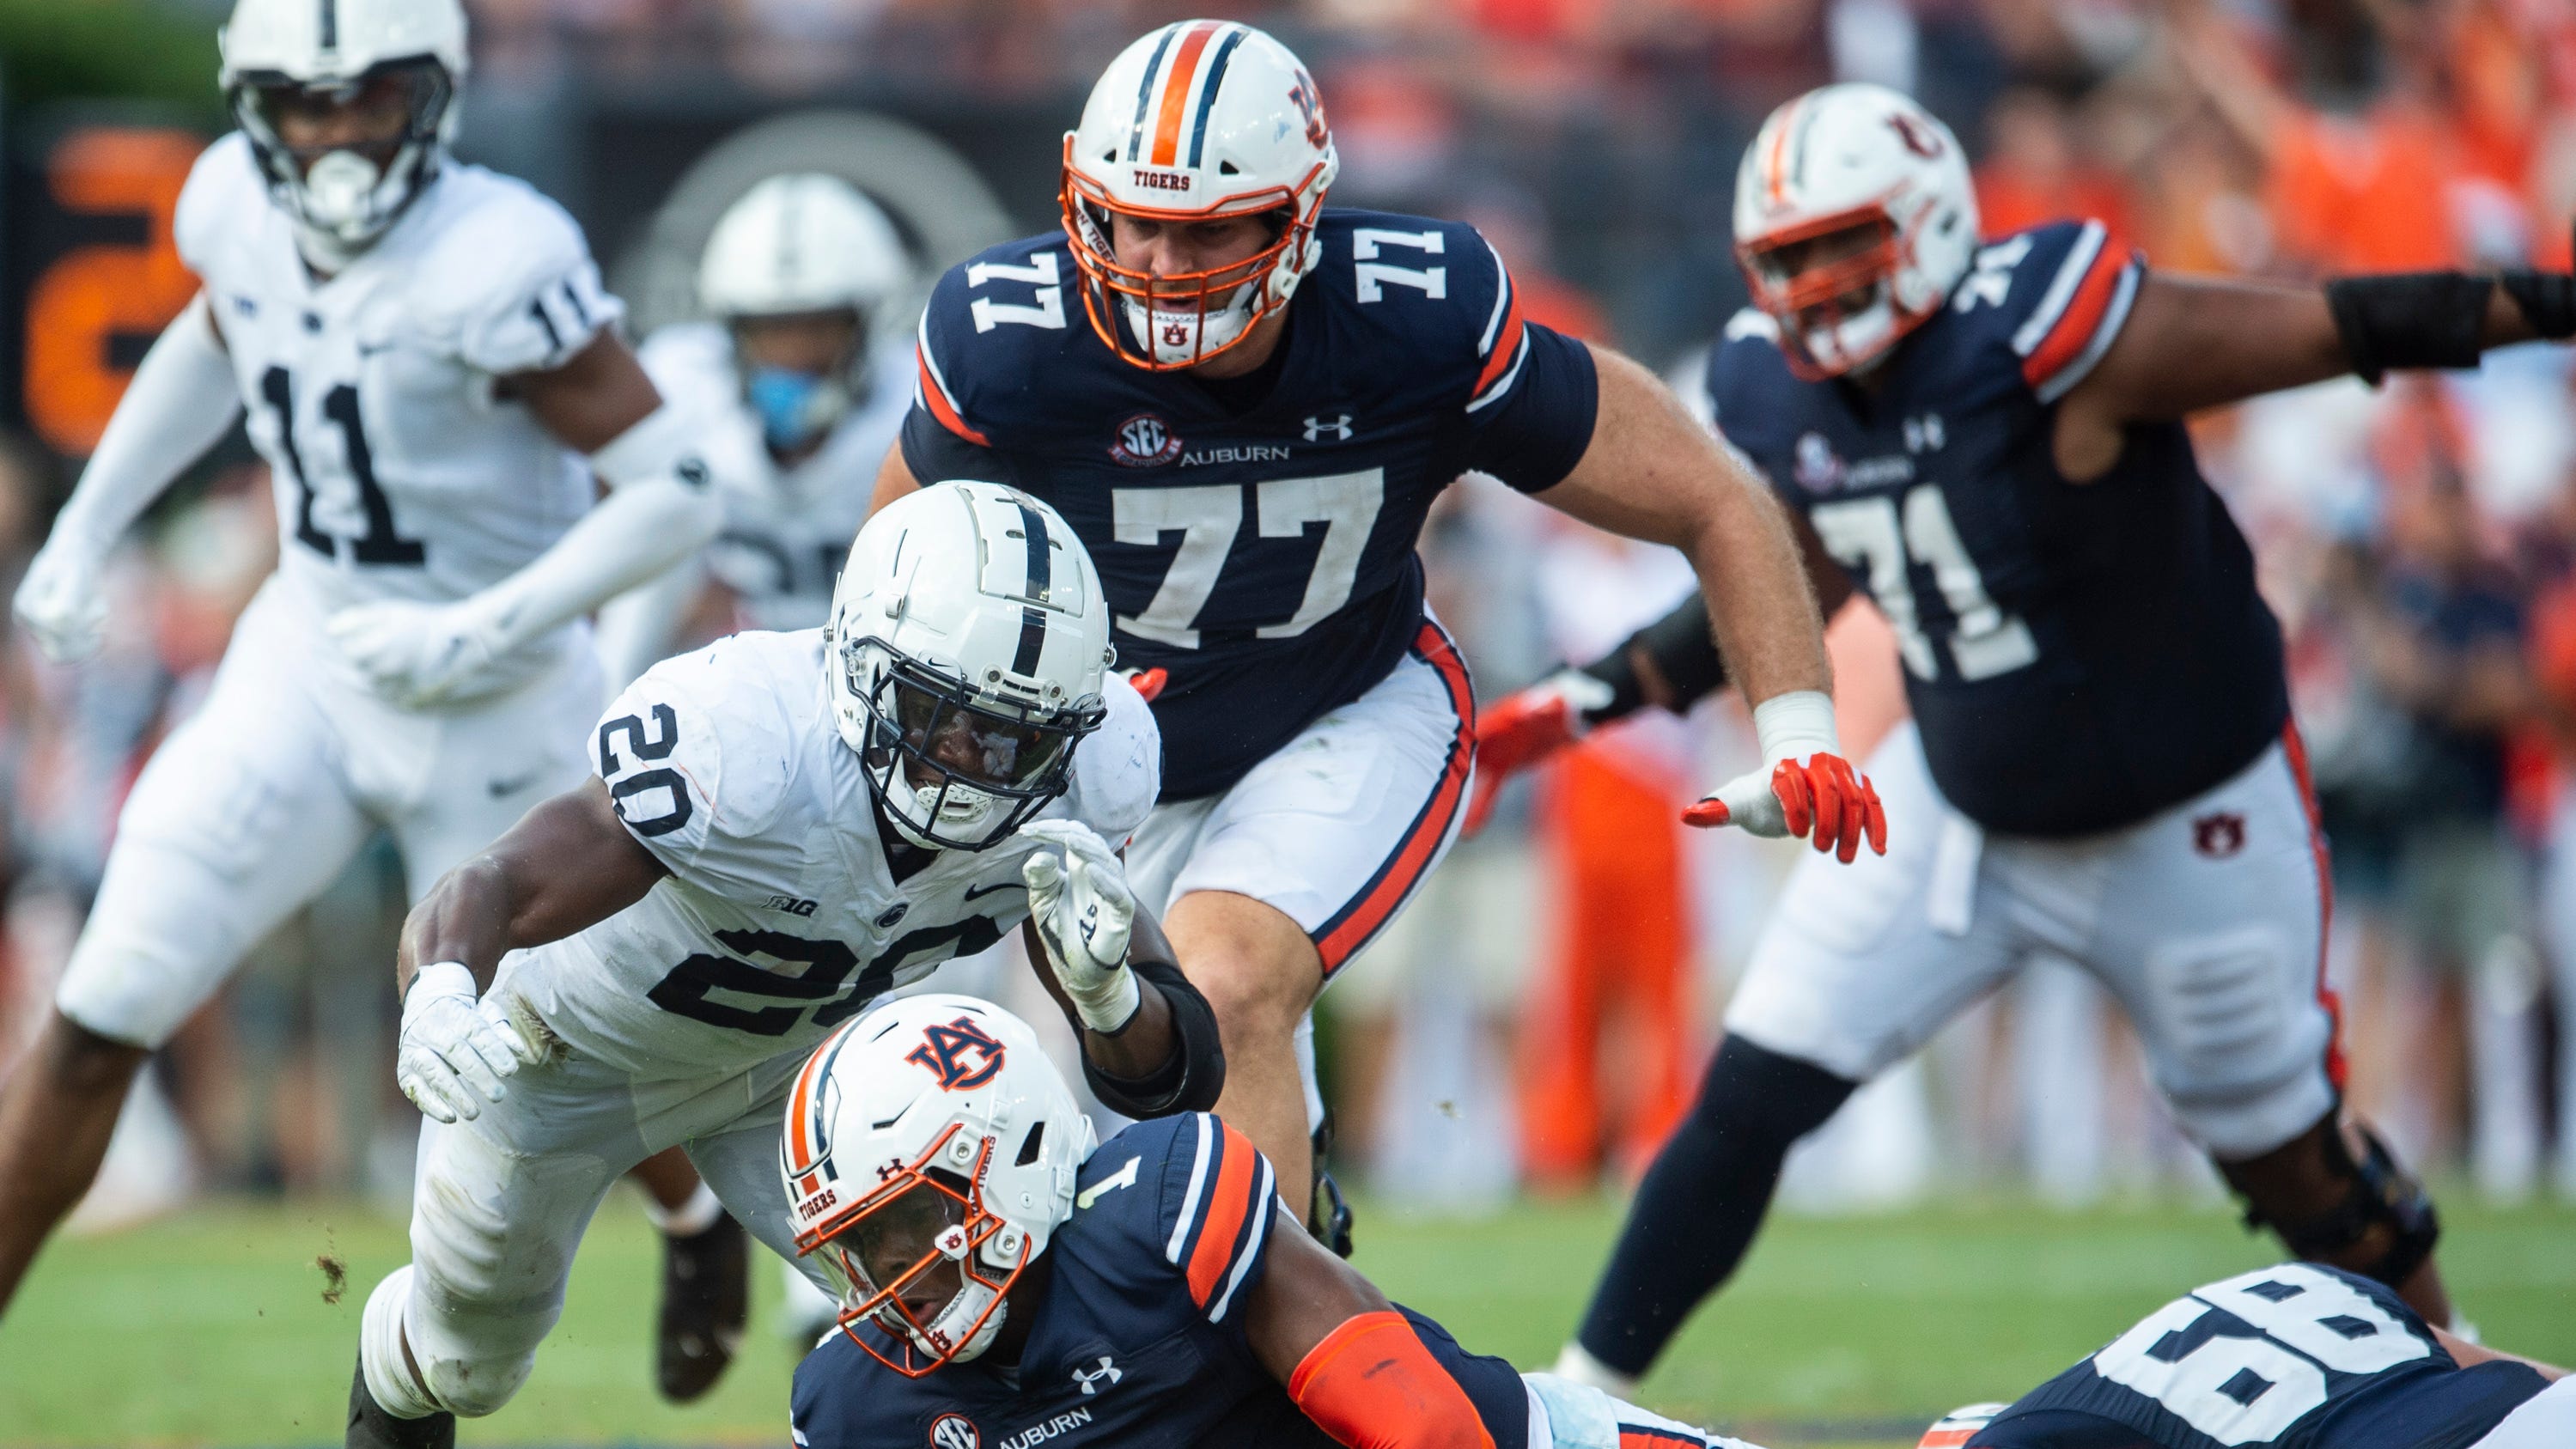 Auburn football score vs. Penn State: Live updates of marquee non-conference game